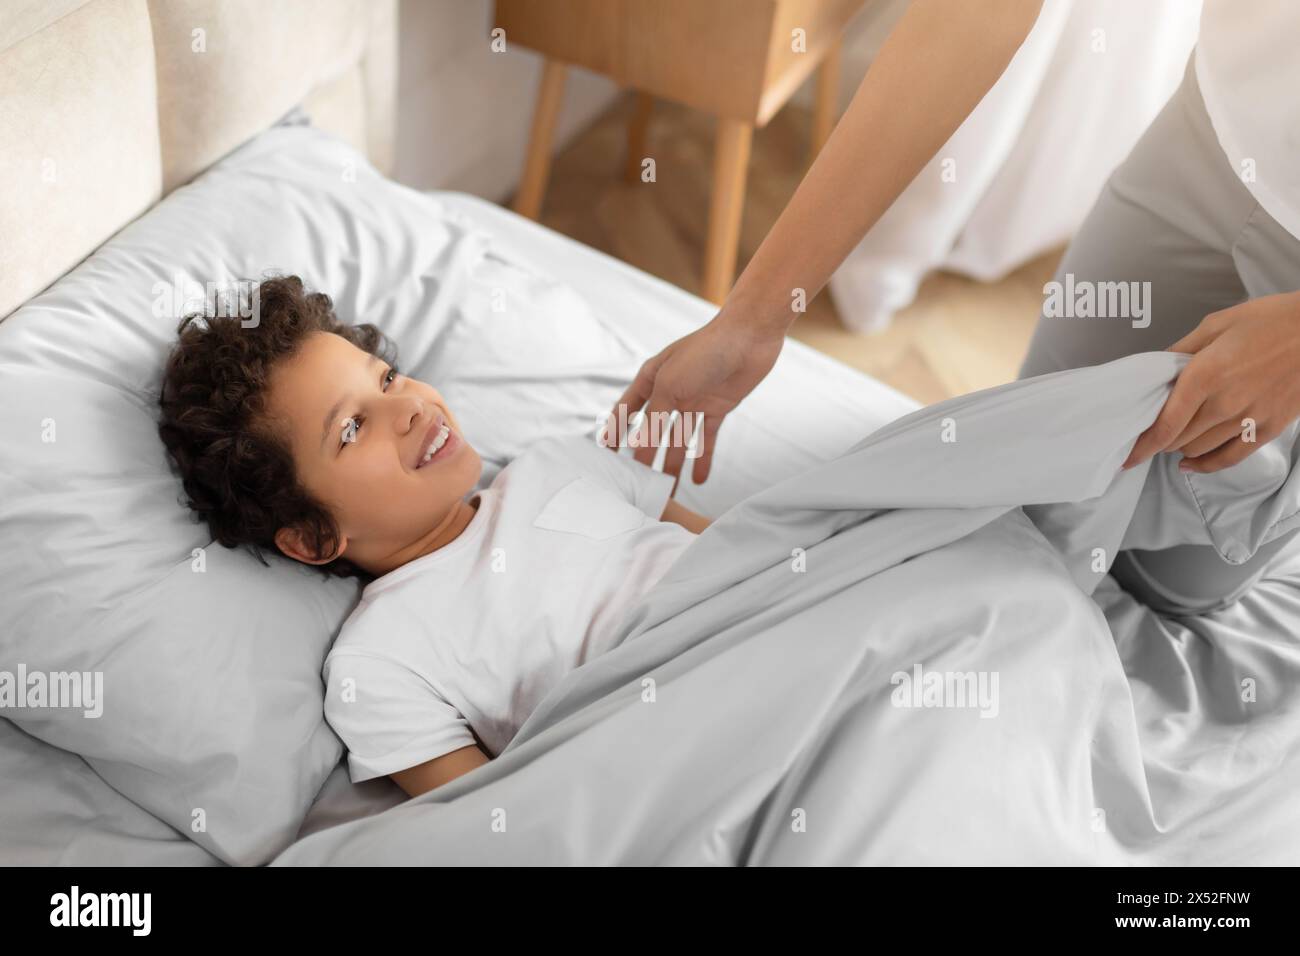 Smiling Child Lying in Bed Being Tucked In by Parent Stock Photo